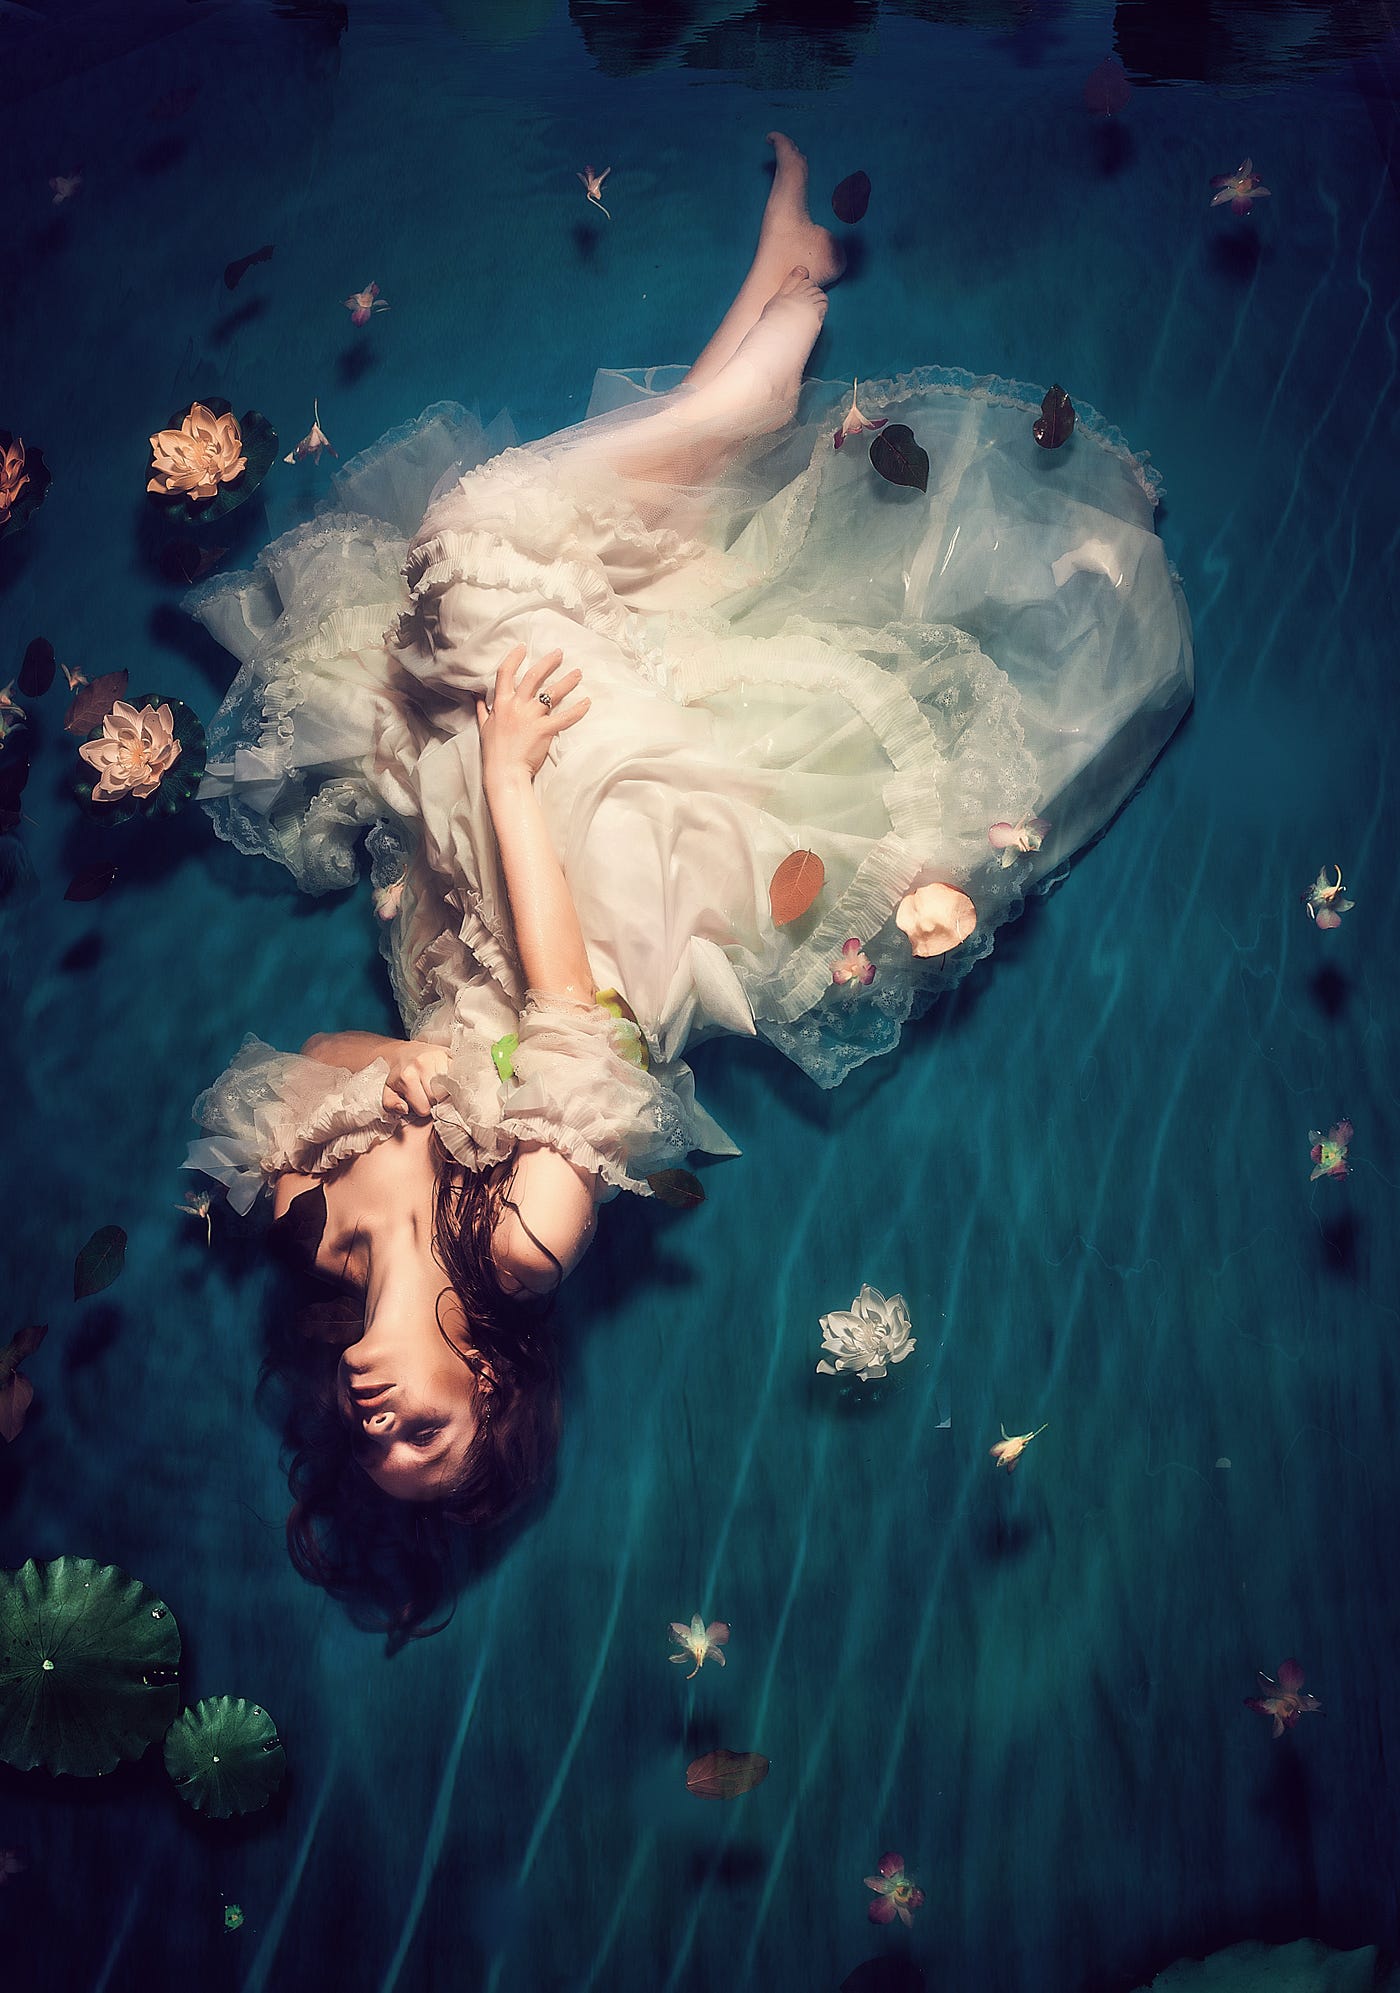 A woman in white dress under water, resting on the river bed, with intense emotions.